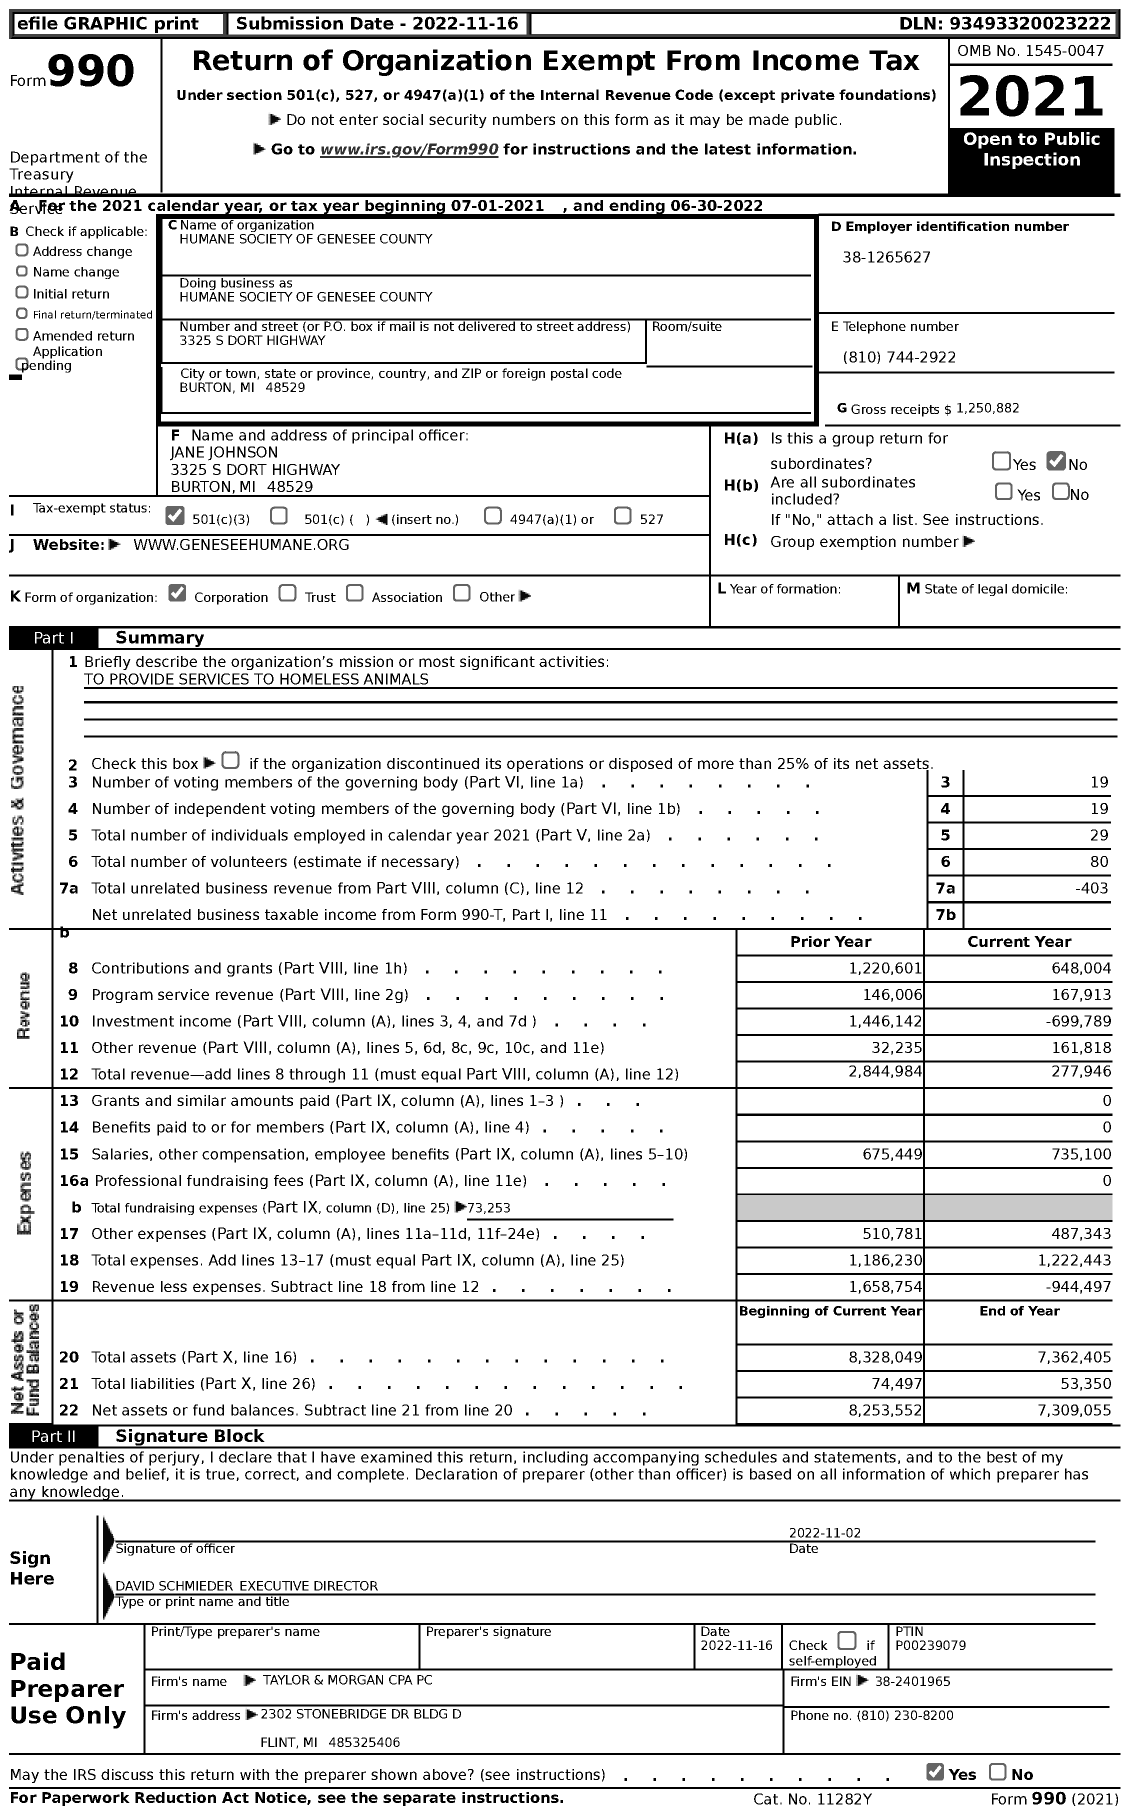 Image of first page of 2021 Form 990 for Humane Society of Genesee County (HSGC)